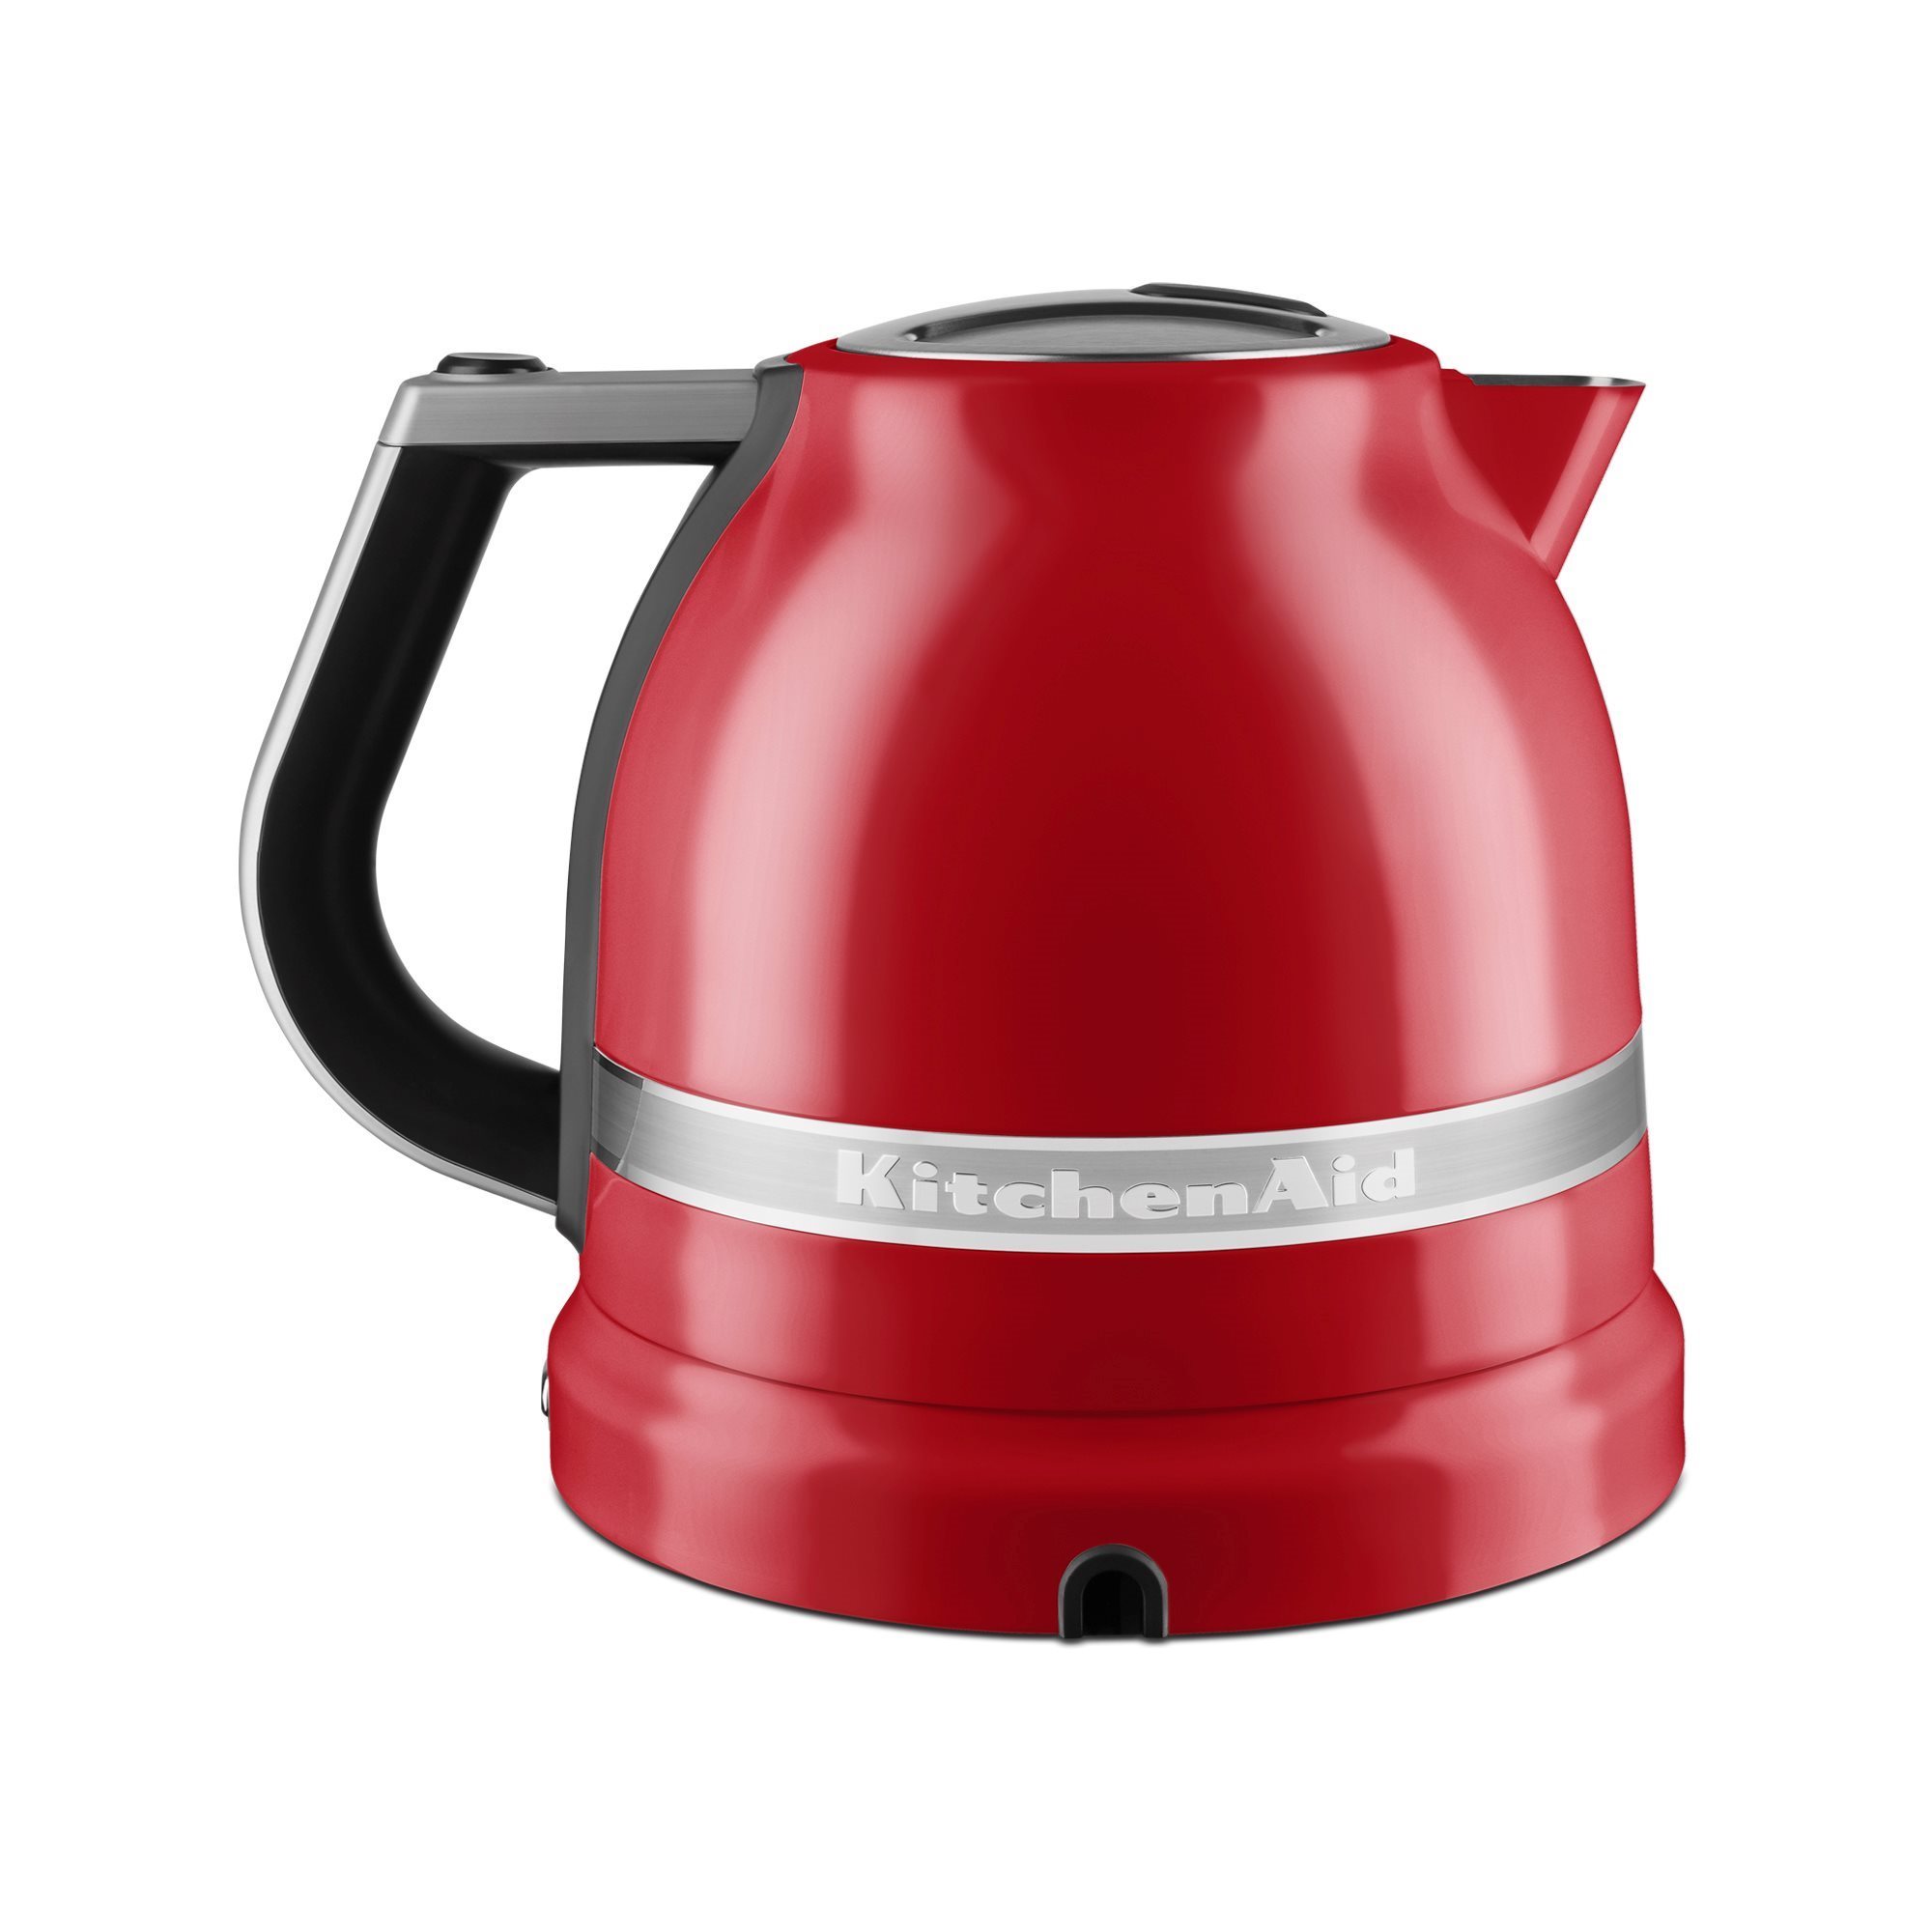 KitchenAid 1.5 Liter Capacity Electric Kettle in Empire Red